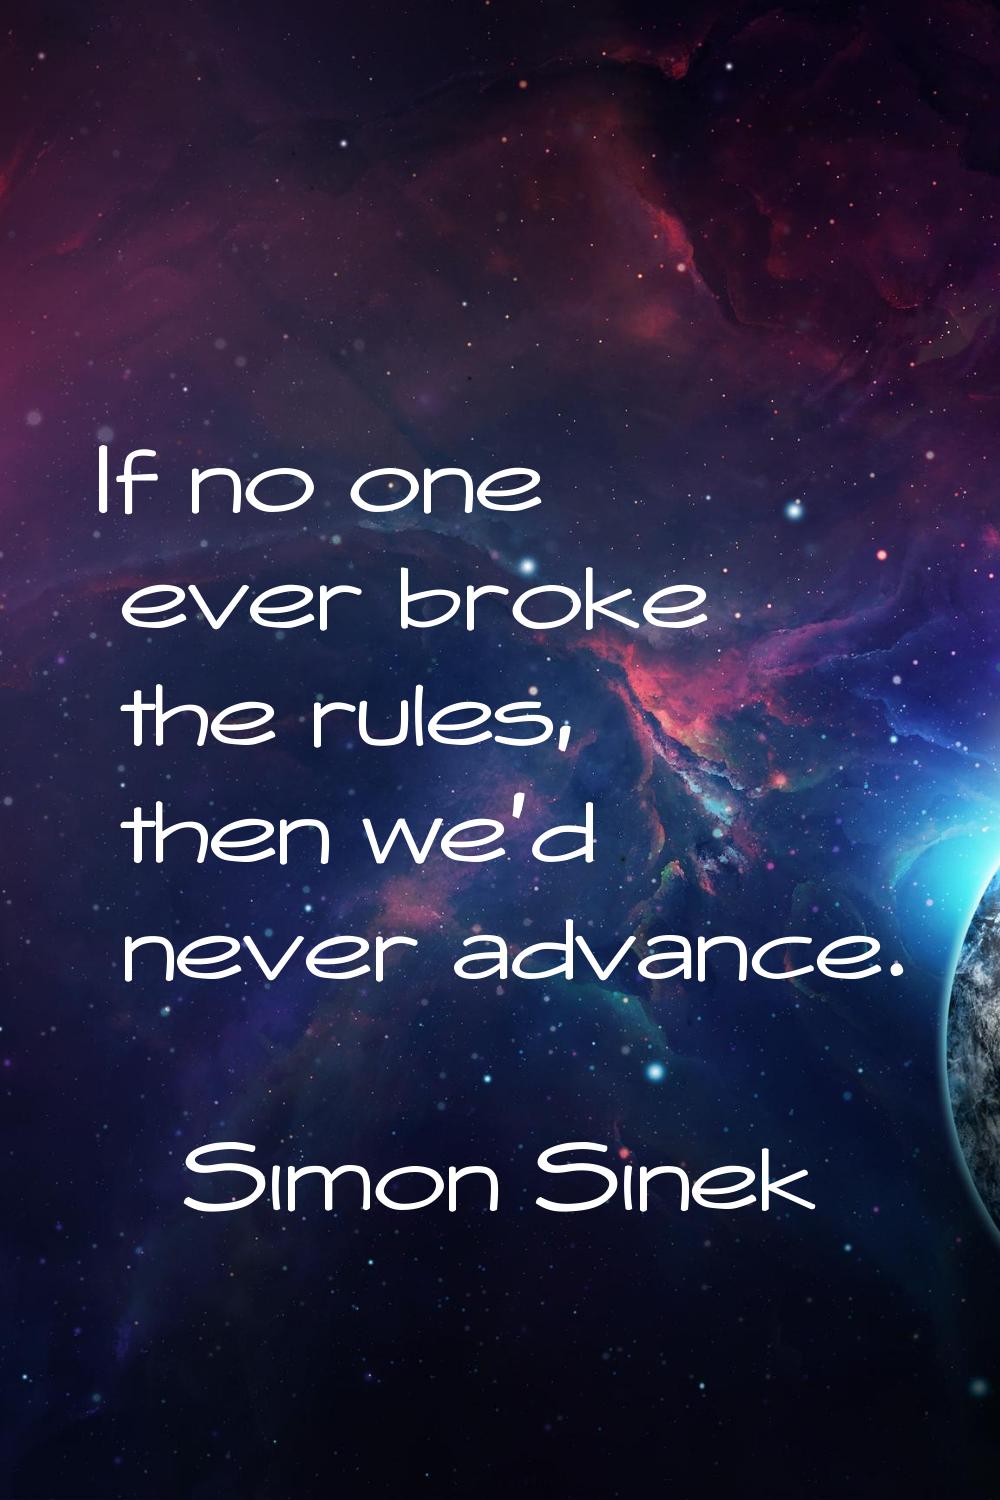 If no one ever broke the rules, then we'd never advance.